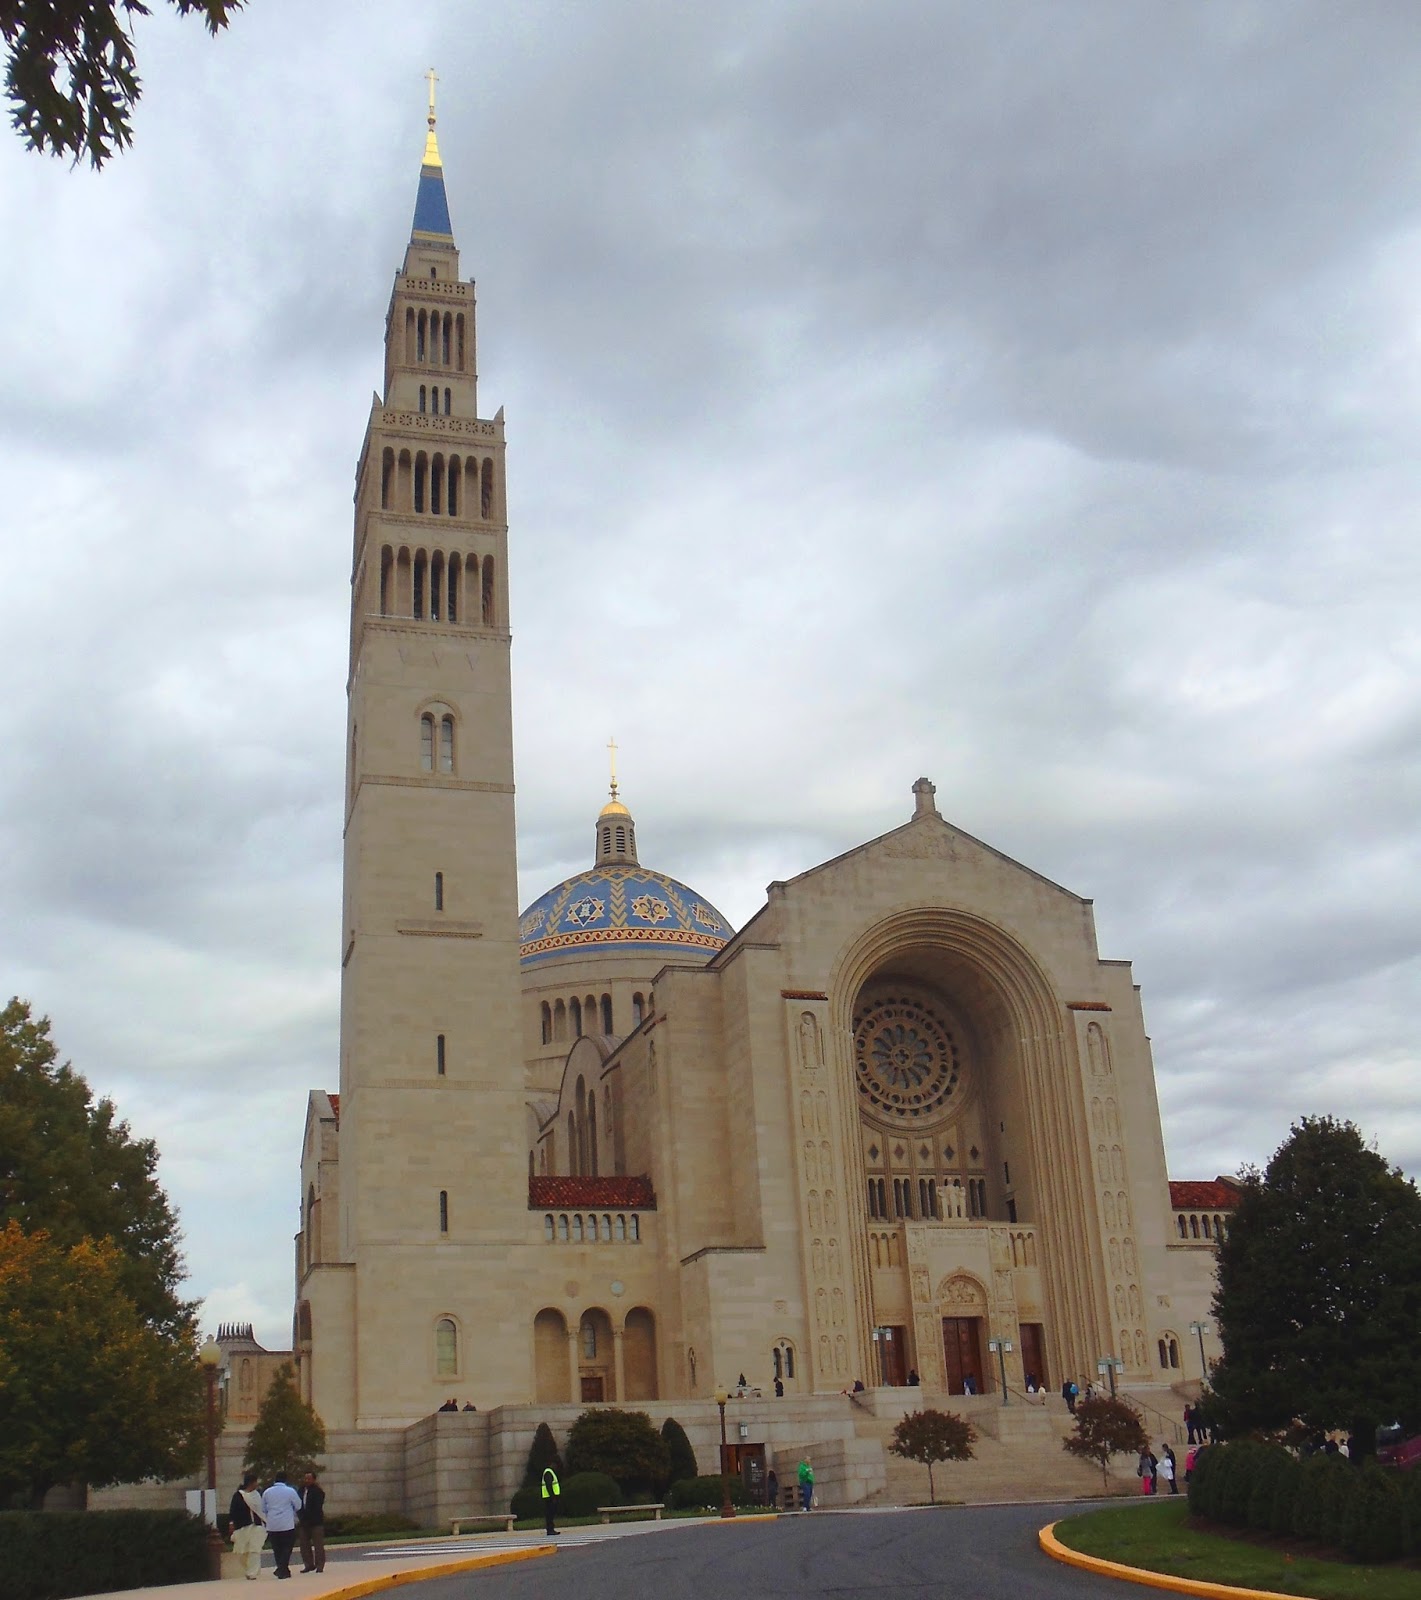 Visiting the Basilica of the National Shrine of the Immaculate ...